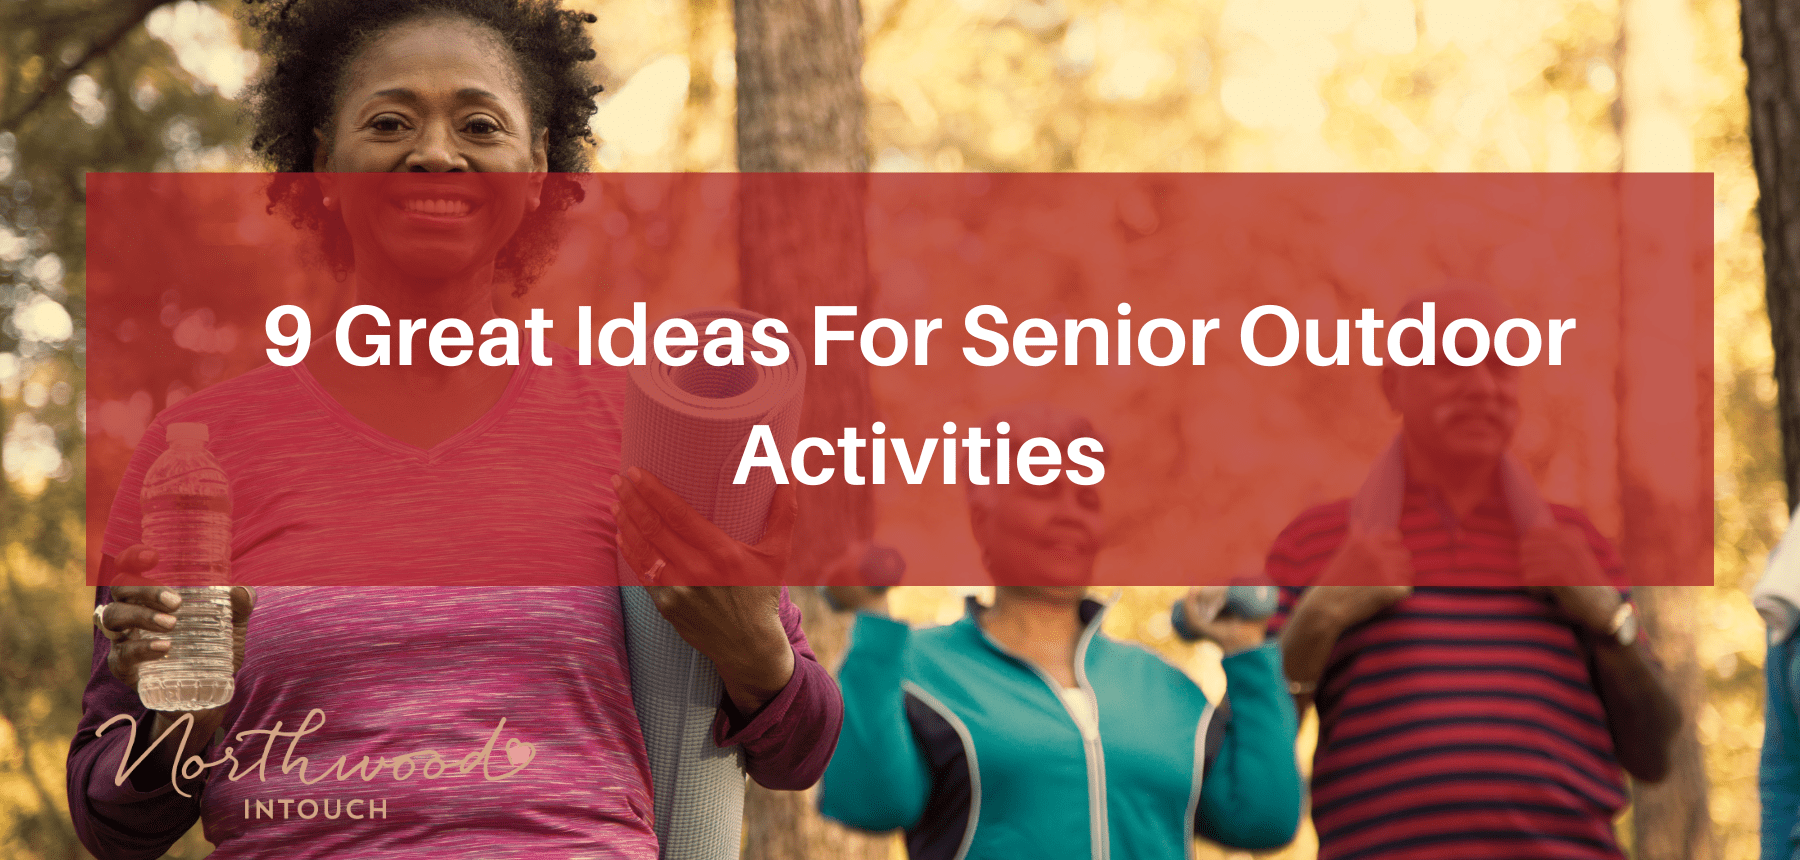 5 Fun Activities to Enjoy this National Senior Citizens Day - Home